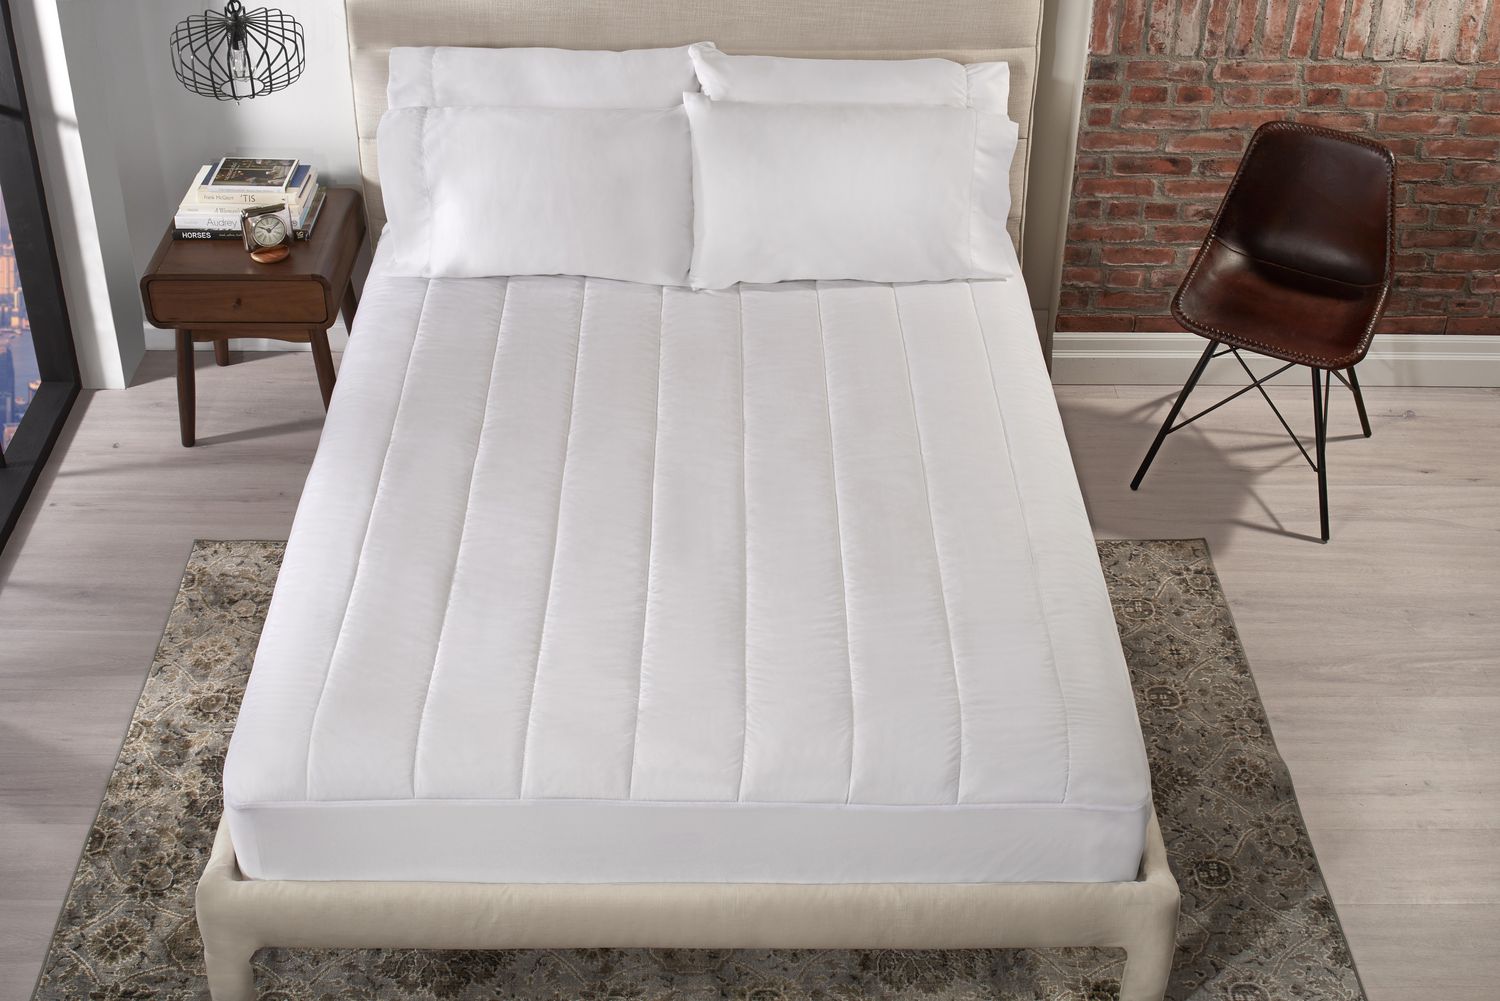 sunbeam quilted electric mattress pad